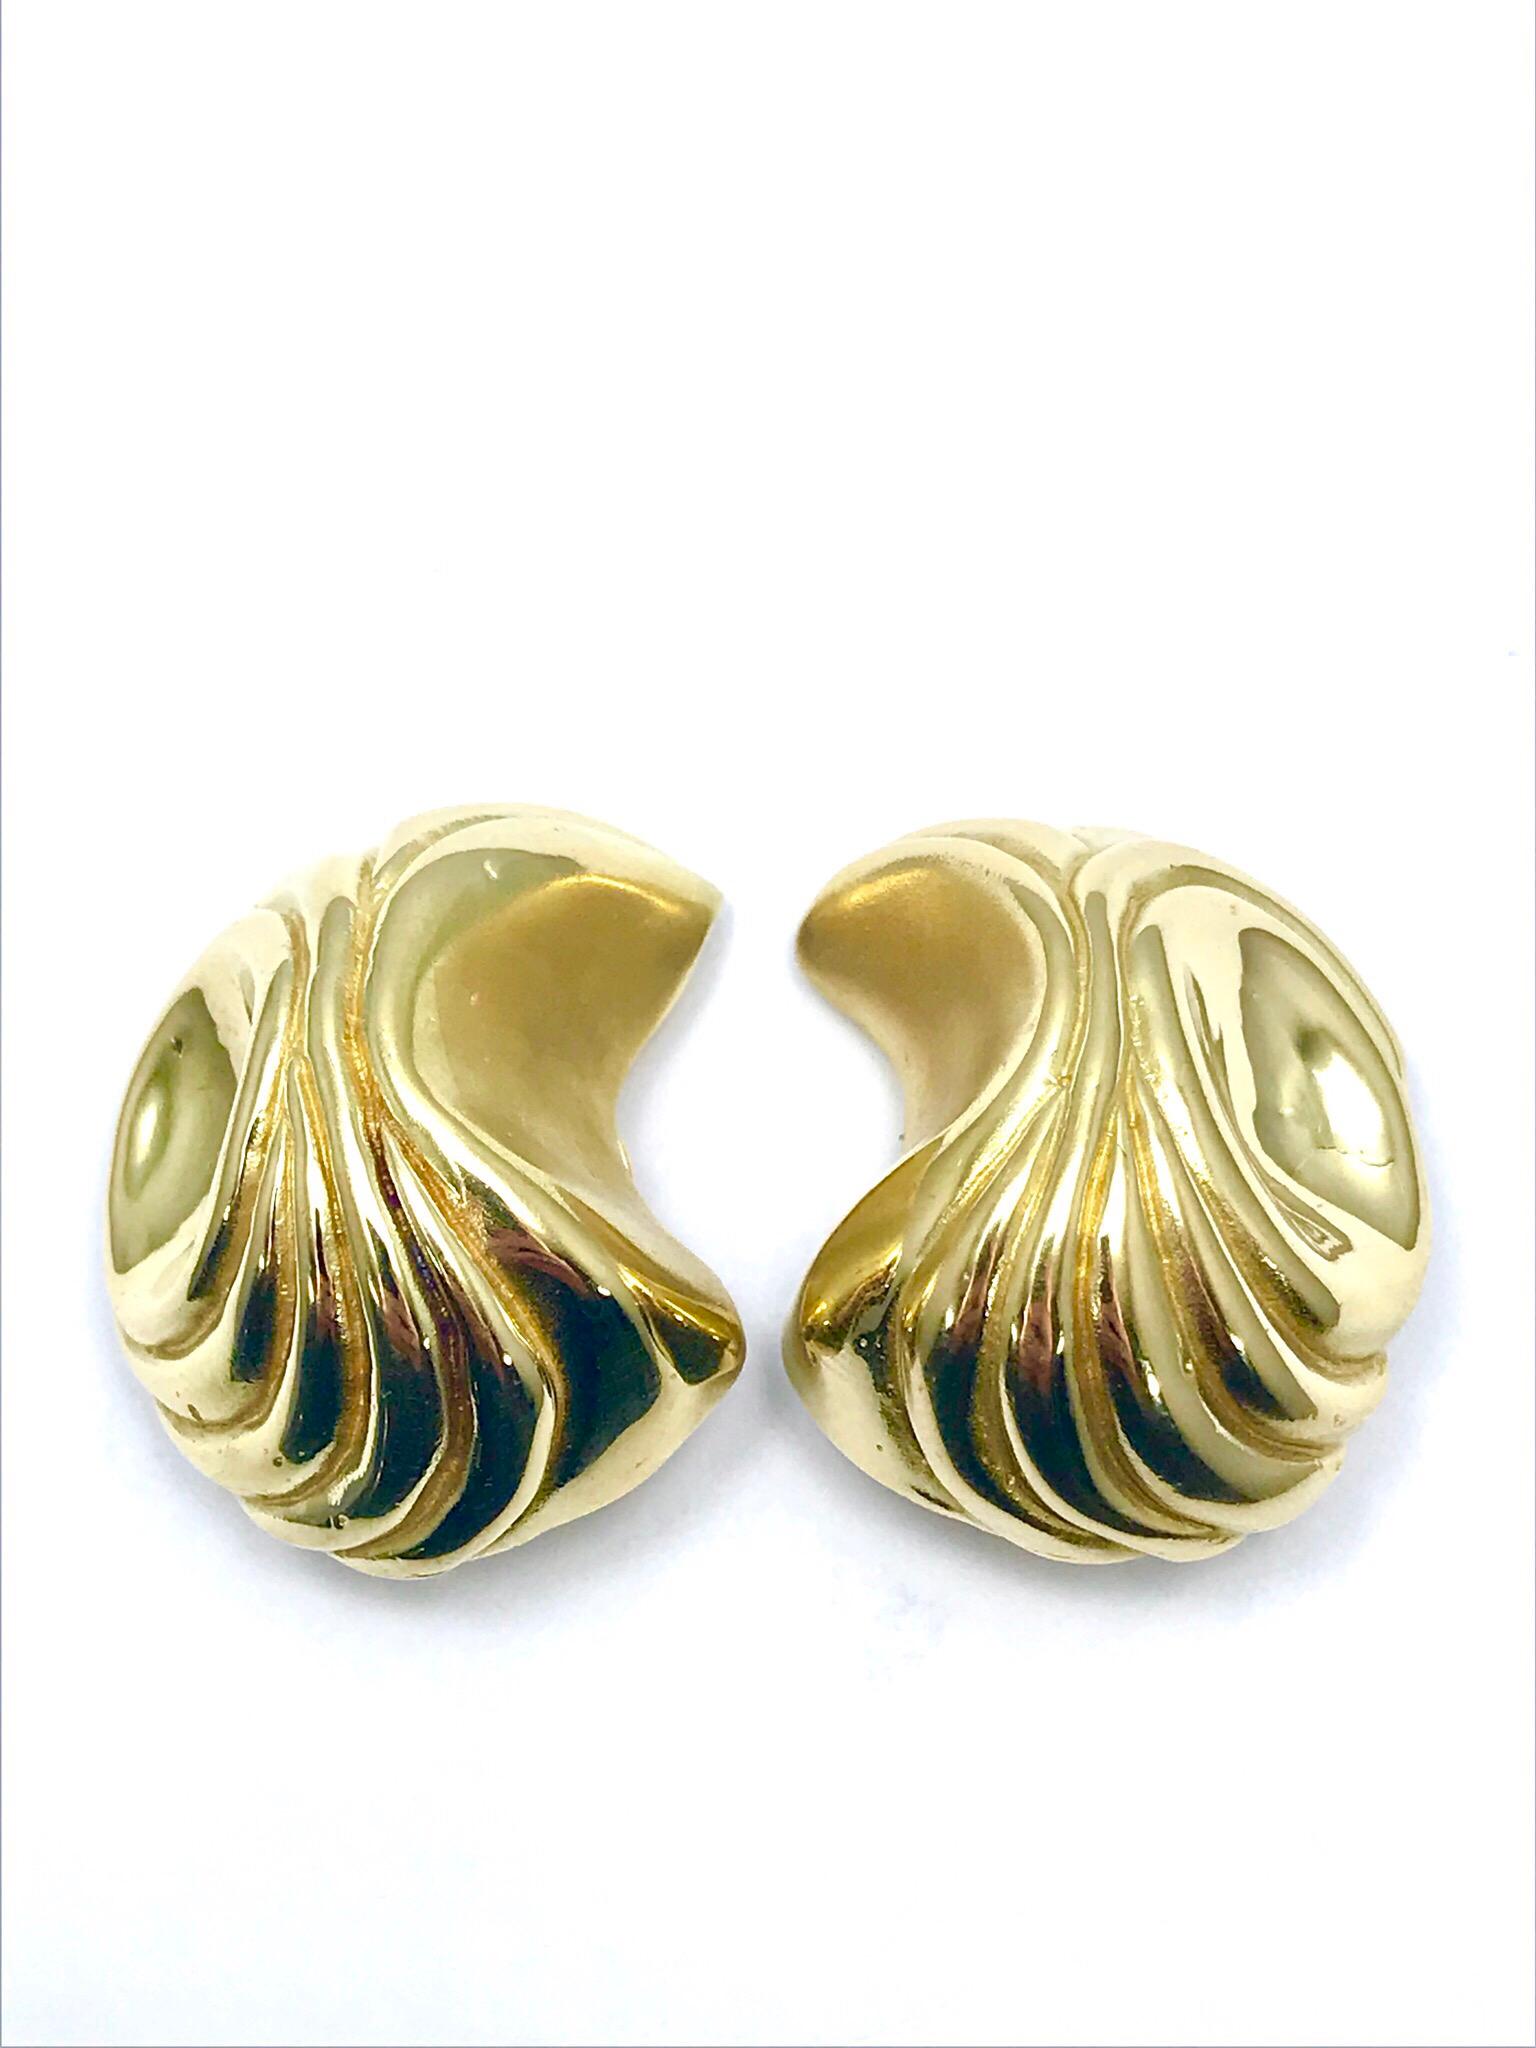 This is a fabulous pair of Elizabeth Gage handcrafted 18 Karat yellow gold clip-on earrings.  These earrings are designed as a geometric retro style dome, featuring a spring loaded clip back for comfort and ease.  This is a great pair of earrings